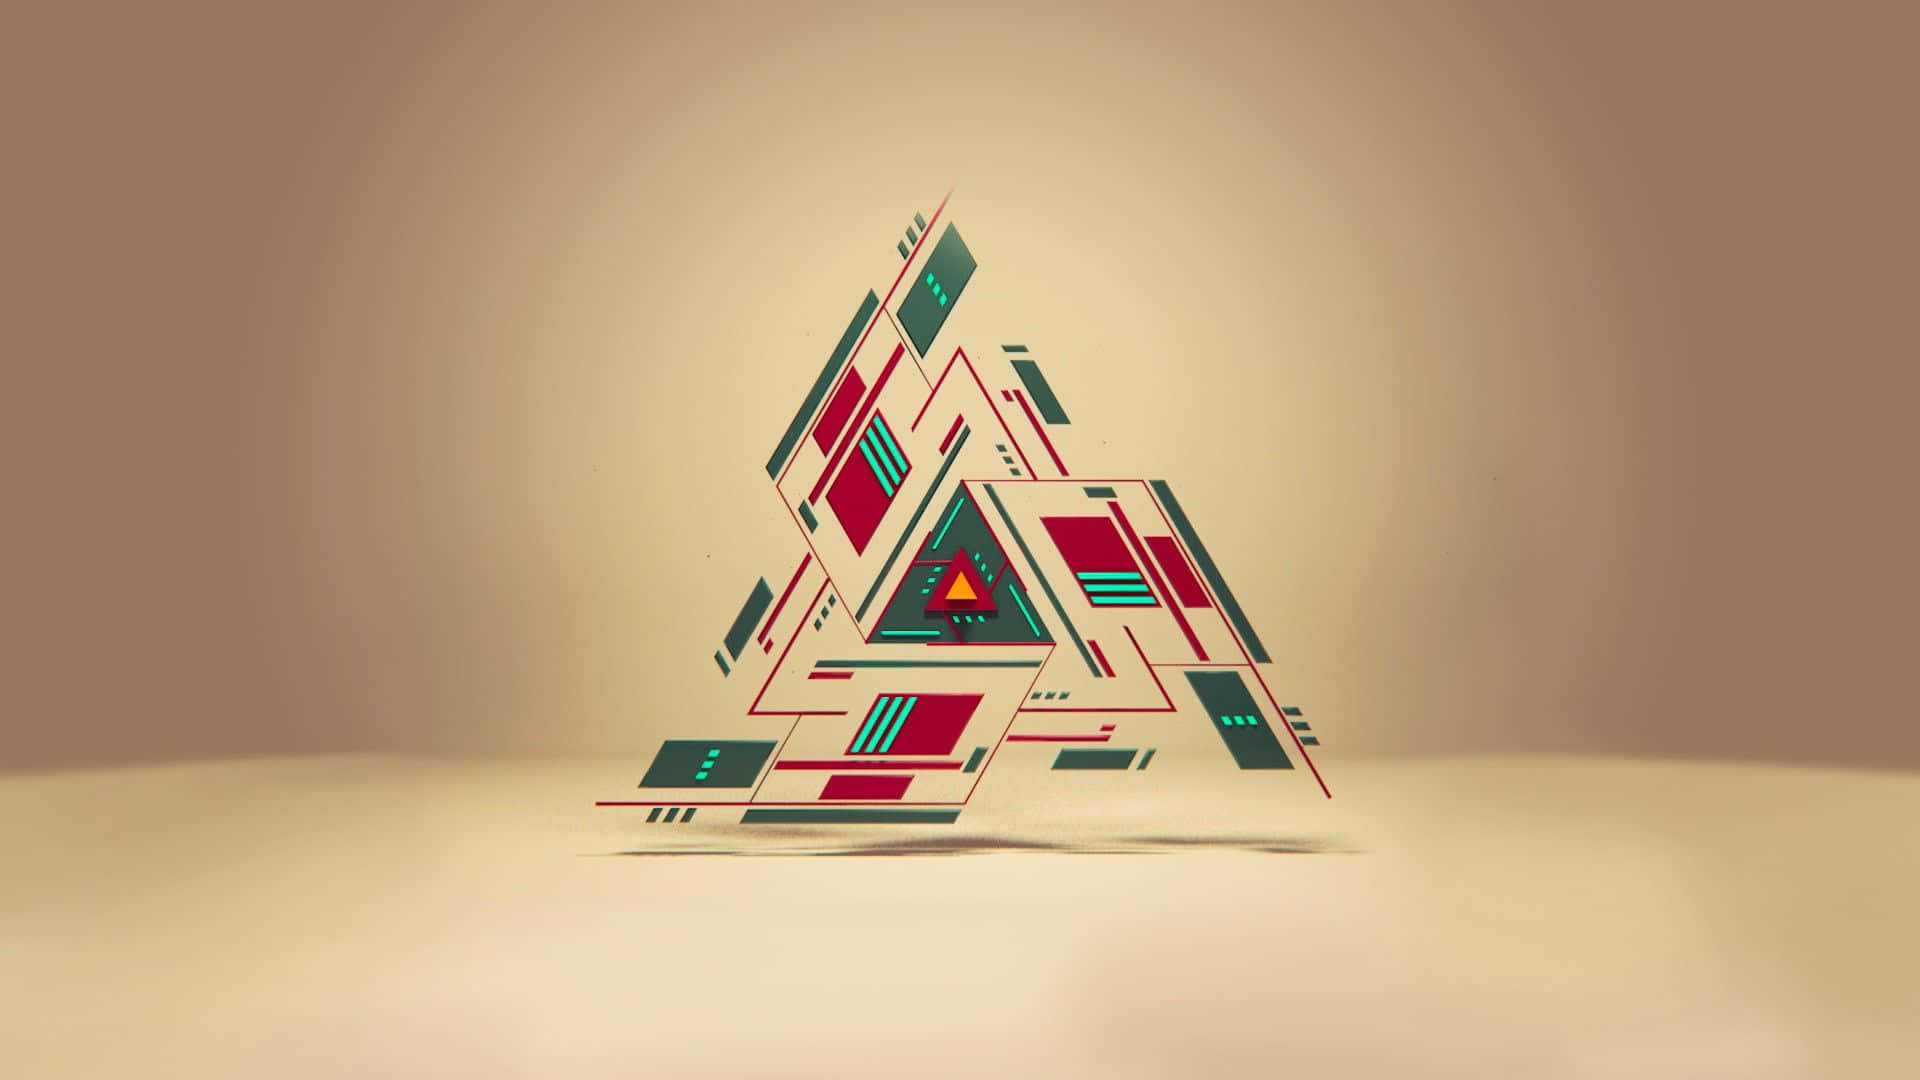 A Abstract Visual of Geometric Shapes